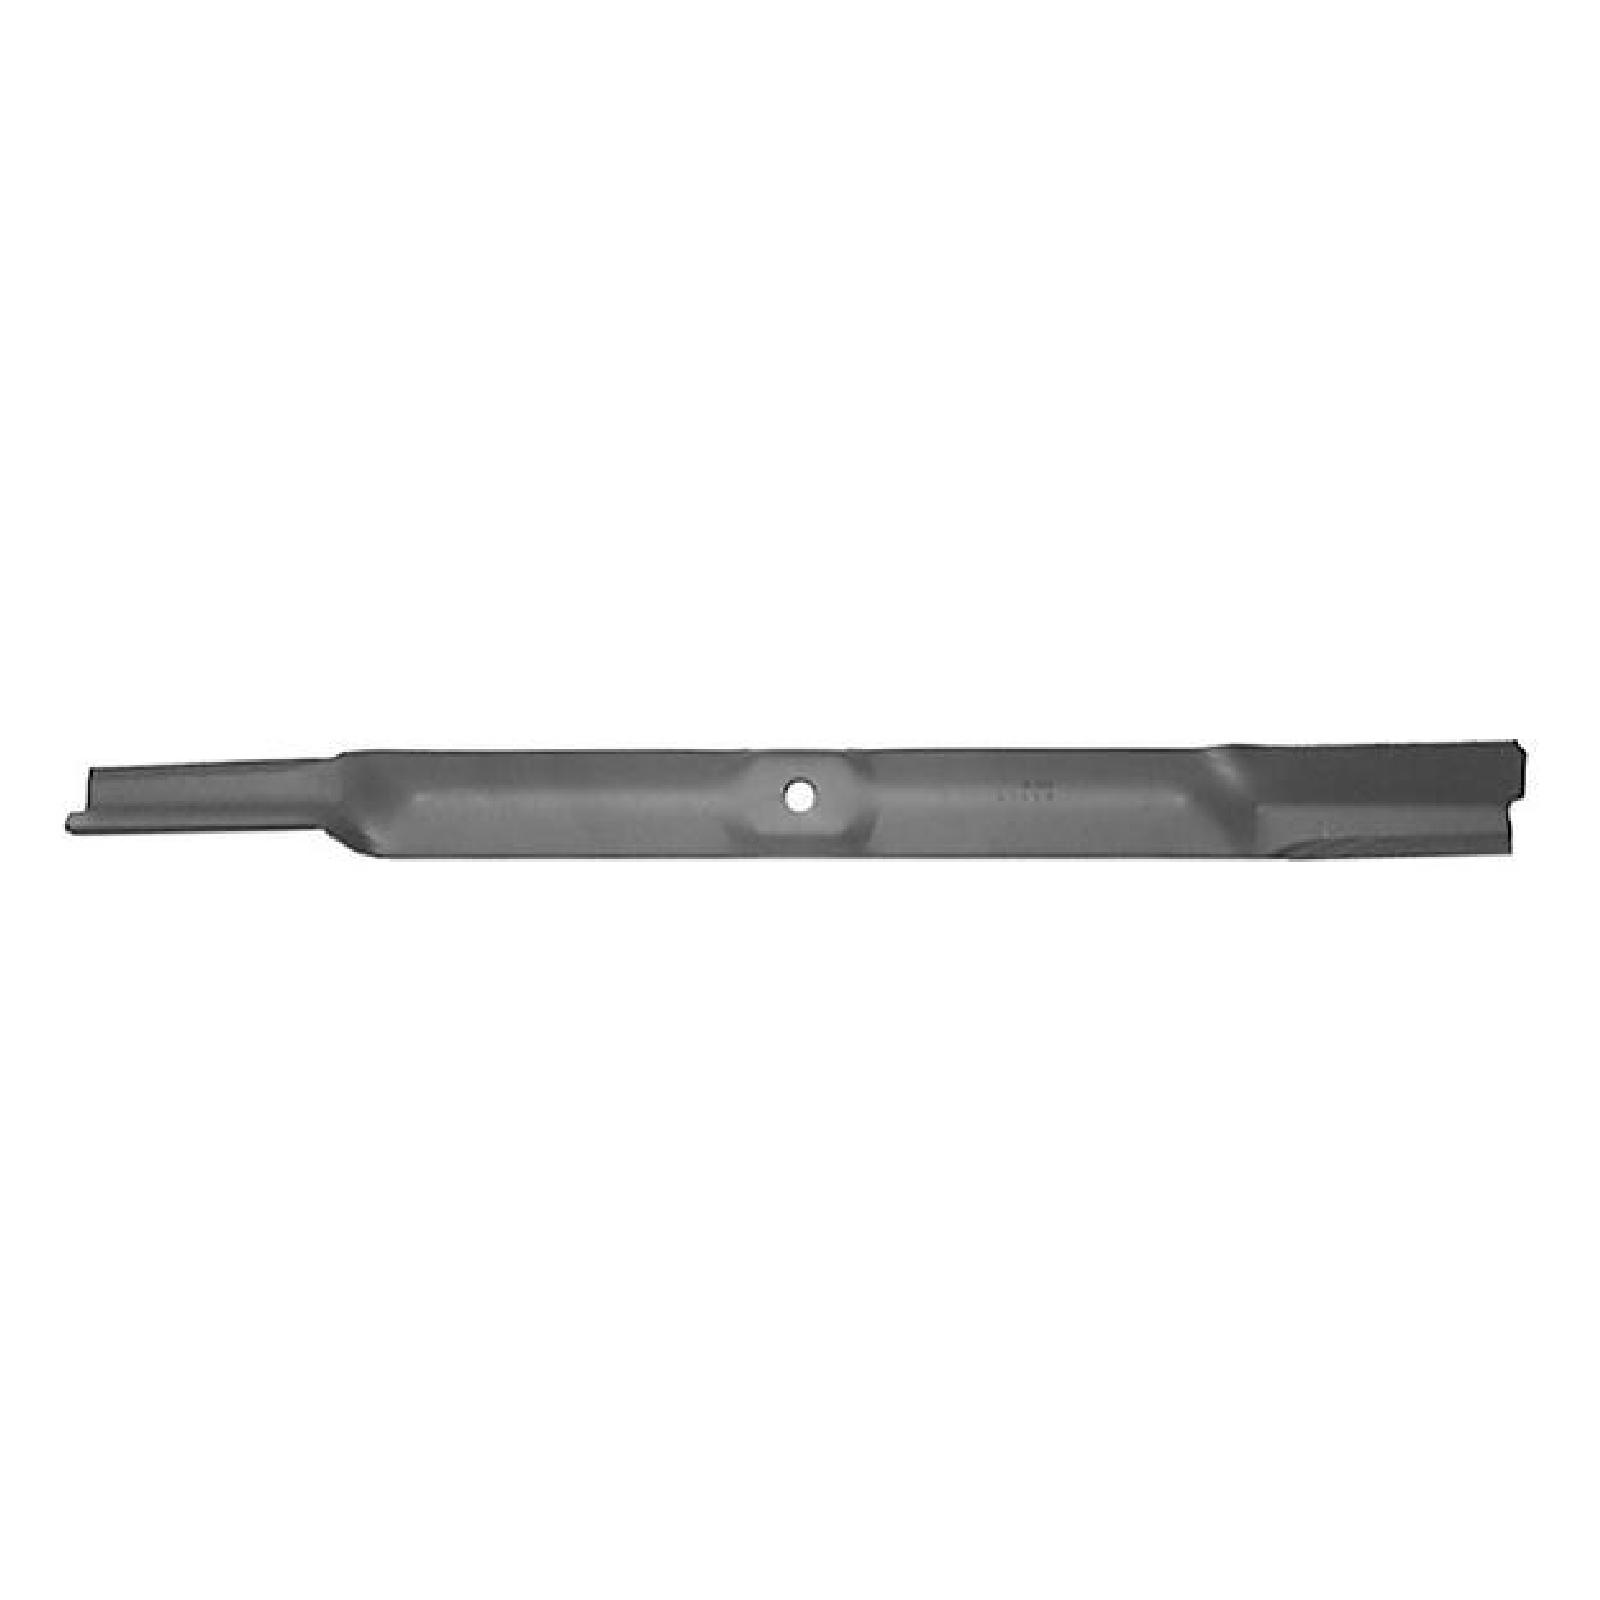 BLADE, JOHN DEERE, M89454 part# 91399 by Oregon - Click Image to Close